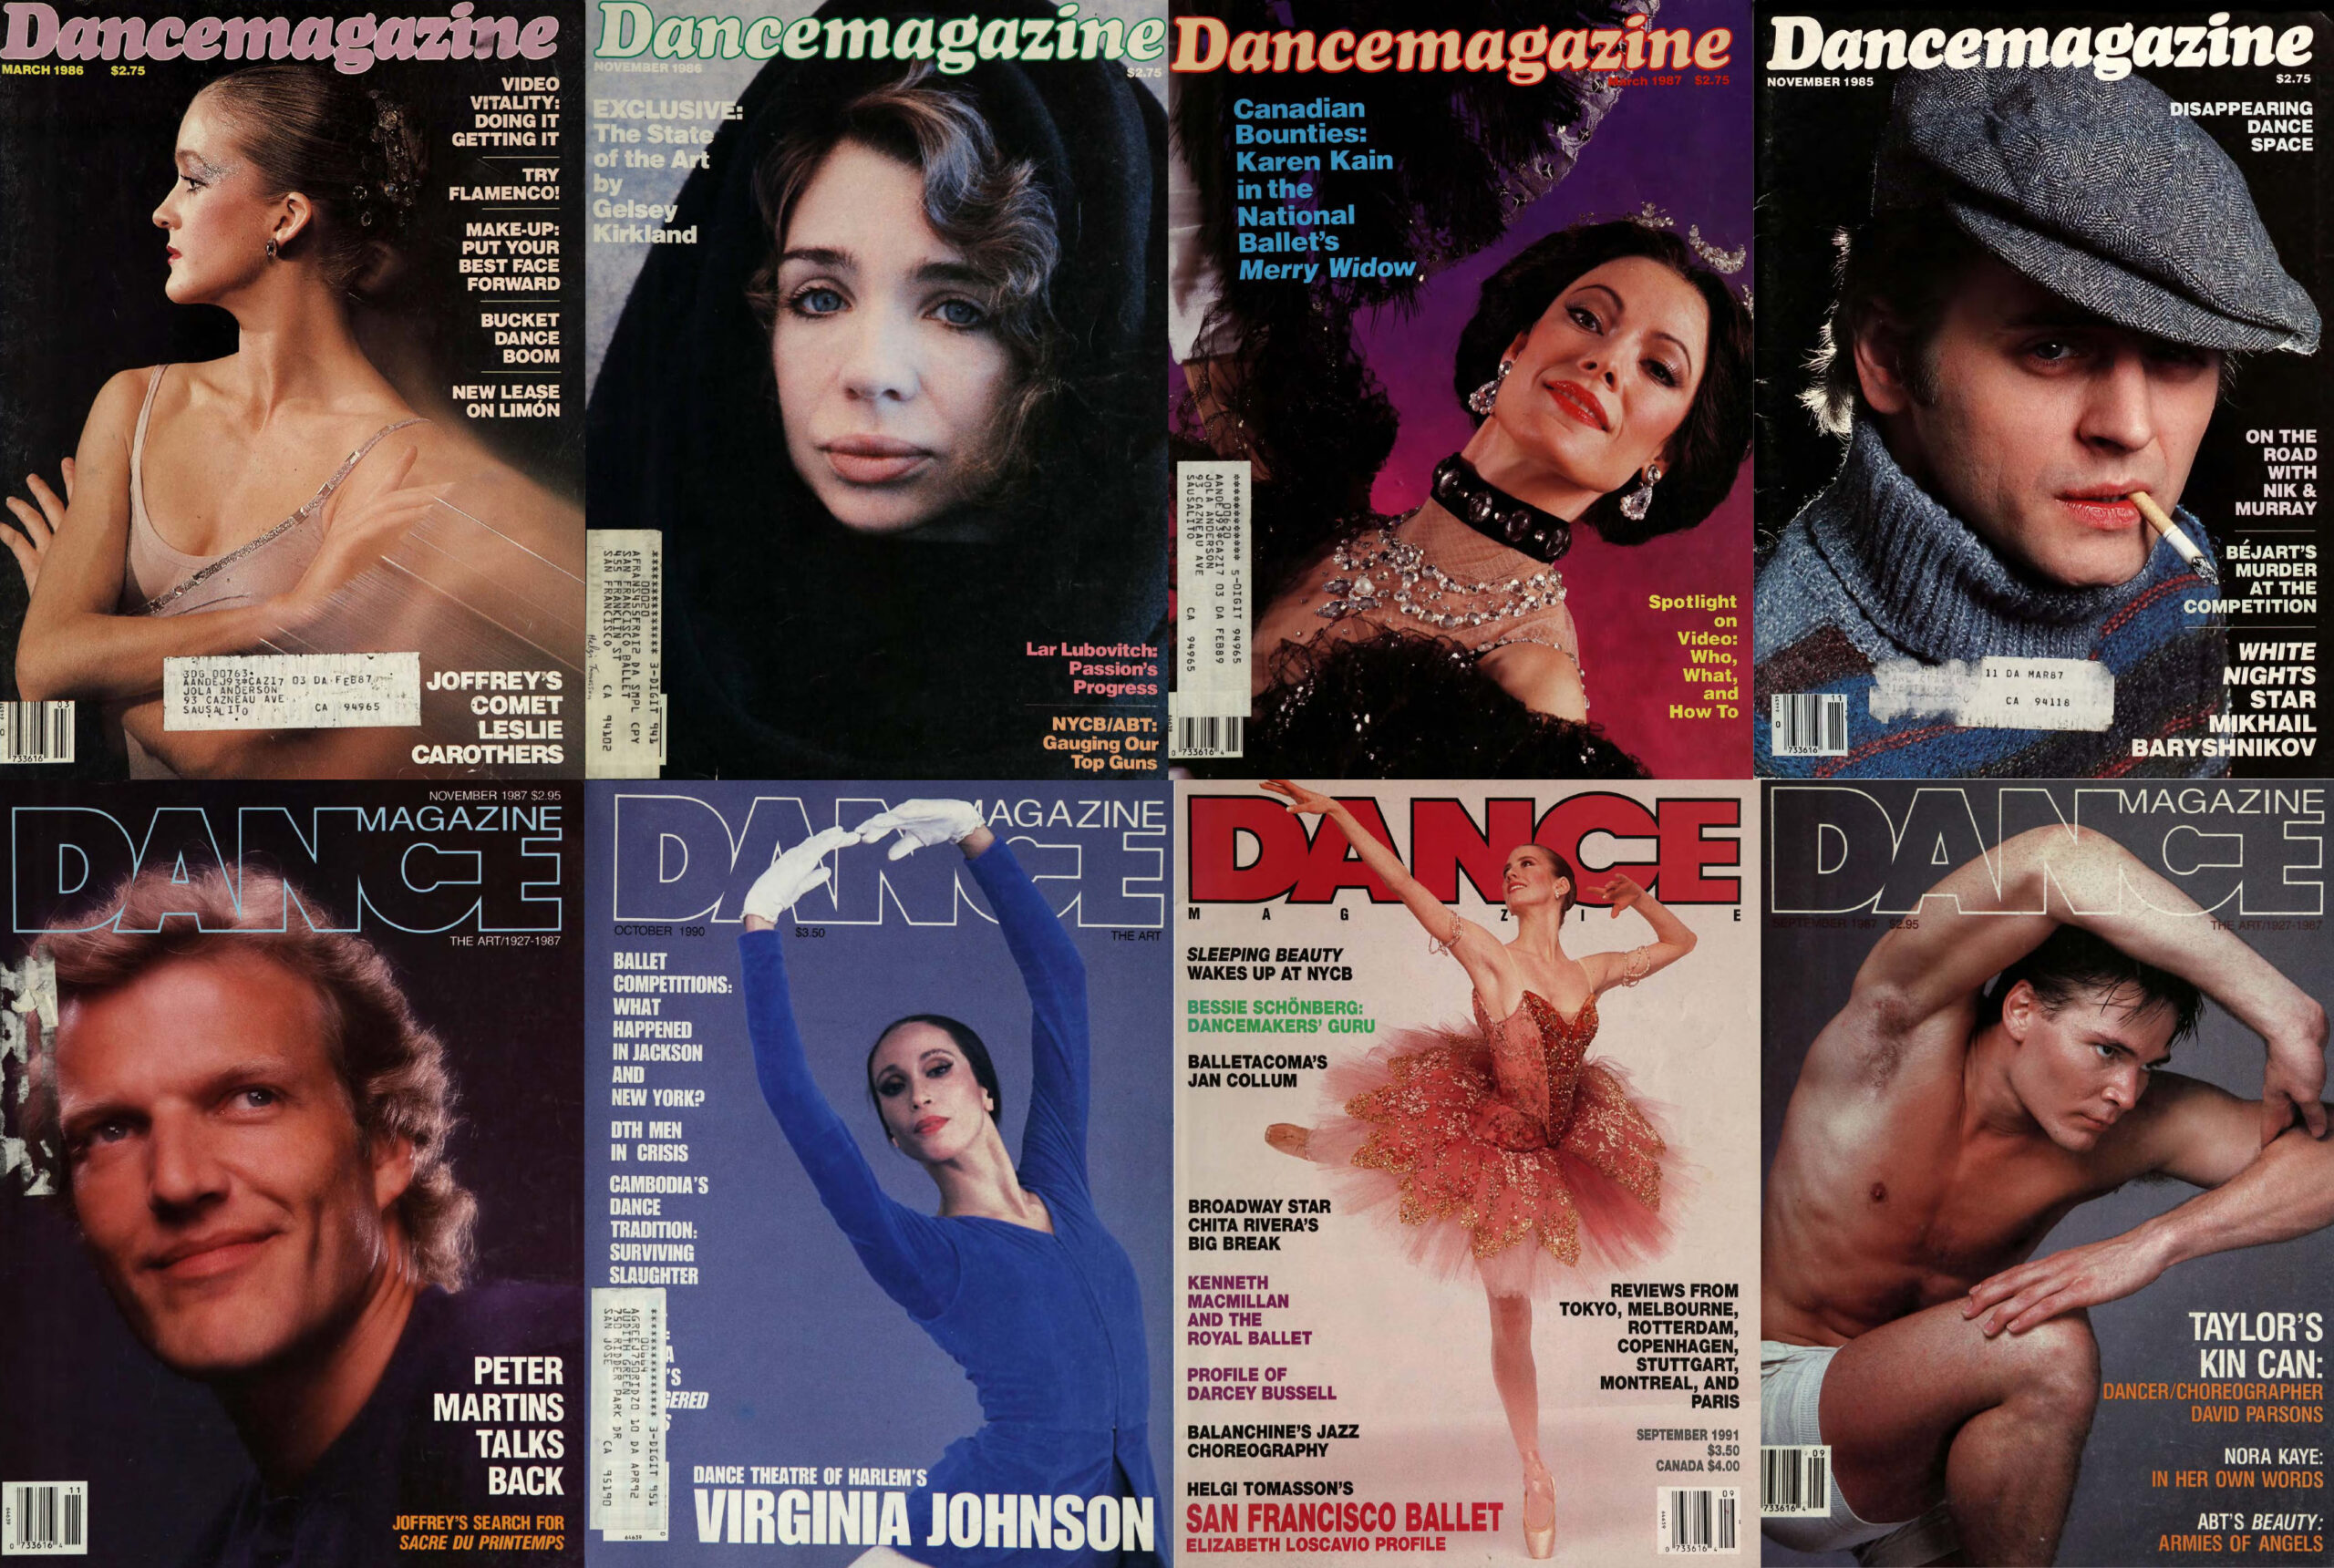 A collage of eight vintage Dance Magazine covers